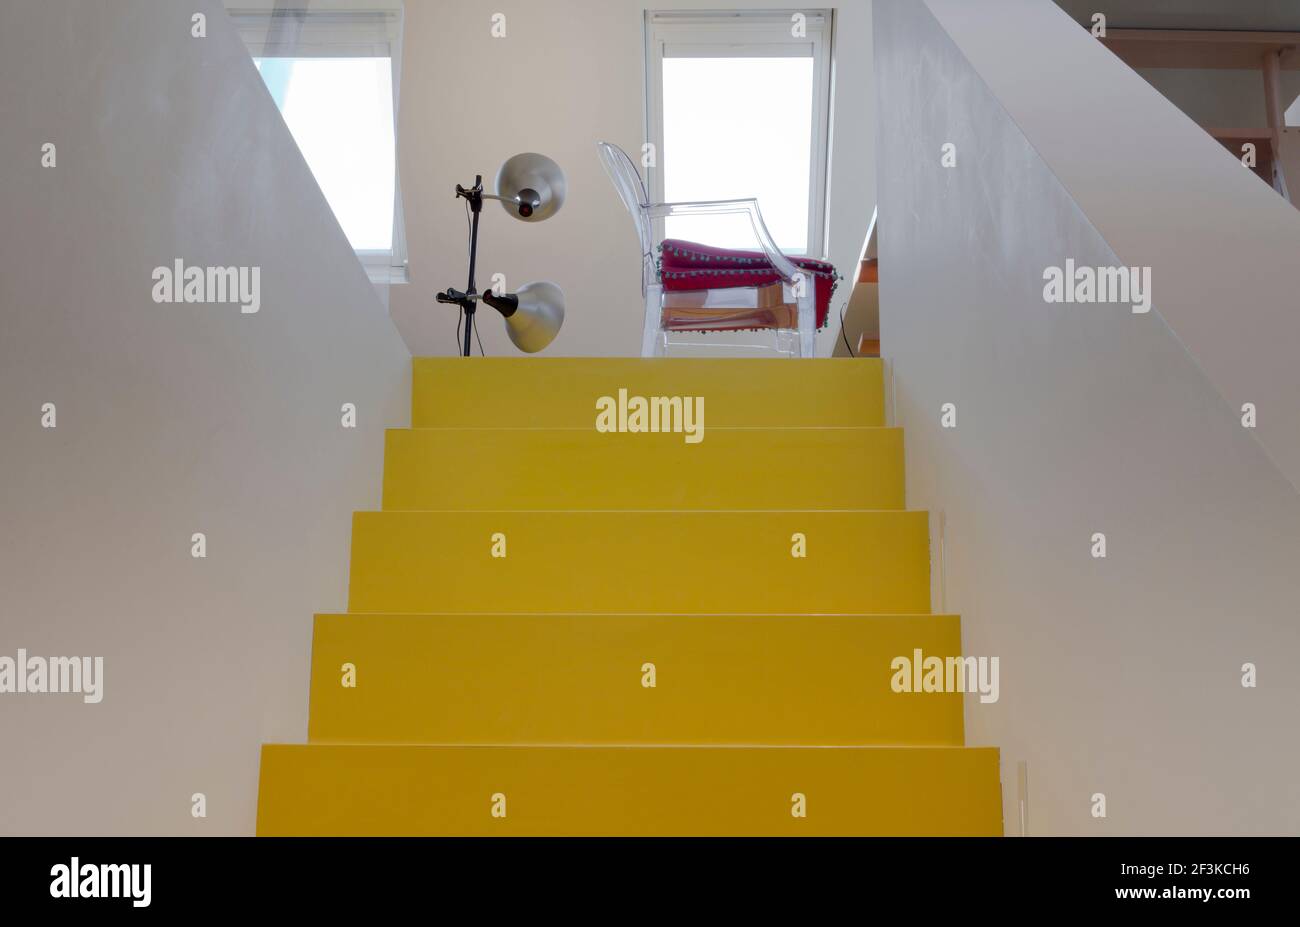 Bright yellow Dalsouple flooring covered stairs lead the way up the Elizath Morgan's atélier/studio/work room in the converted loft space at the top o Stock Photo